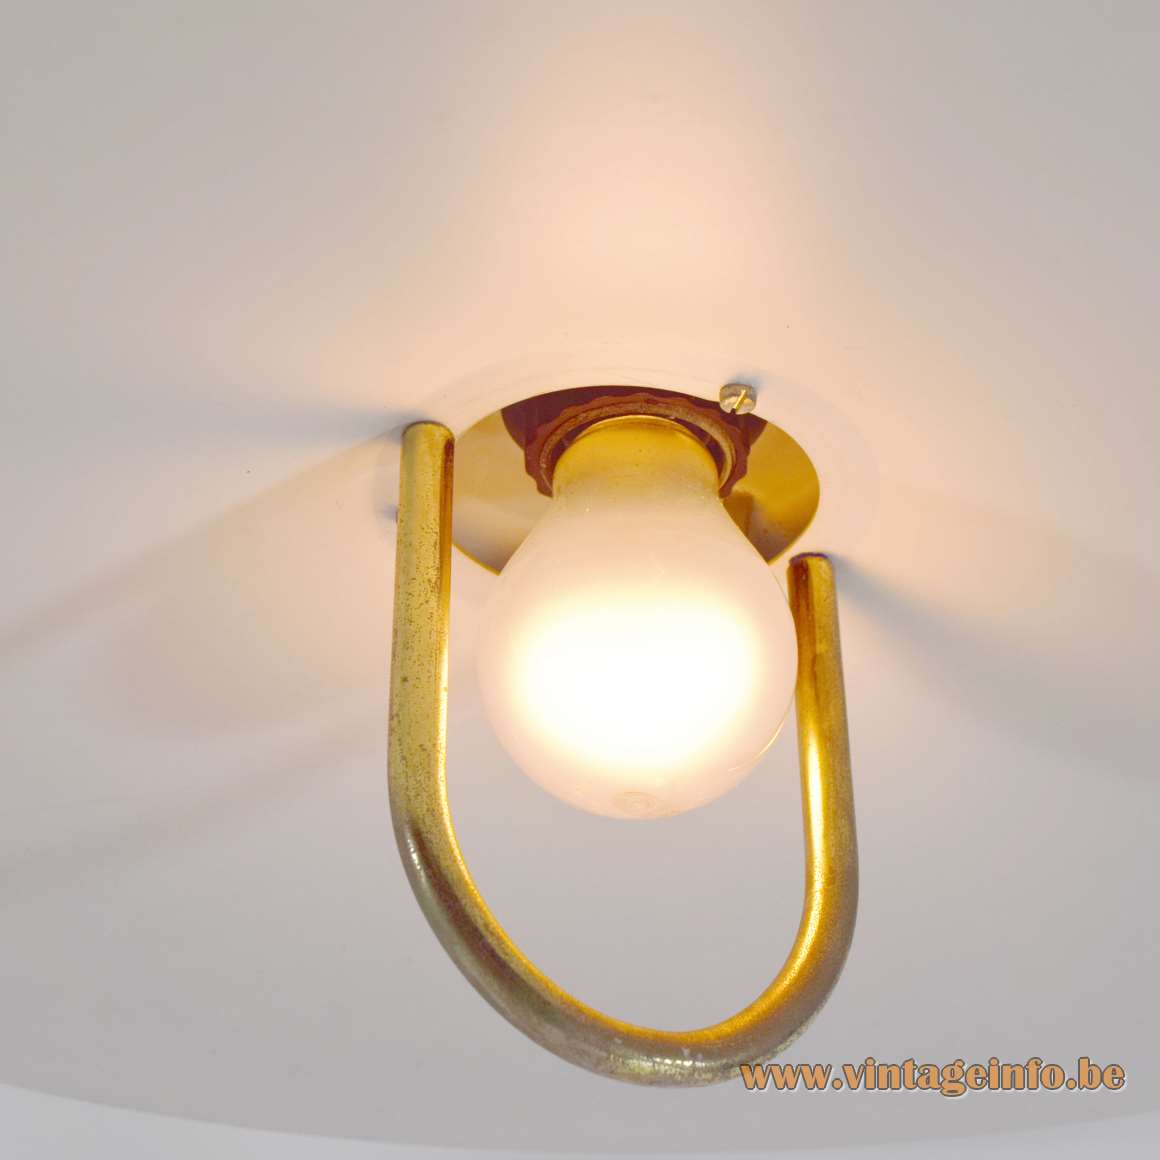 Scandinavian Aluminium Pendant Lamp gold anodized 2 dishes witch hat 1960s 1970s rise & fall MCM